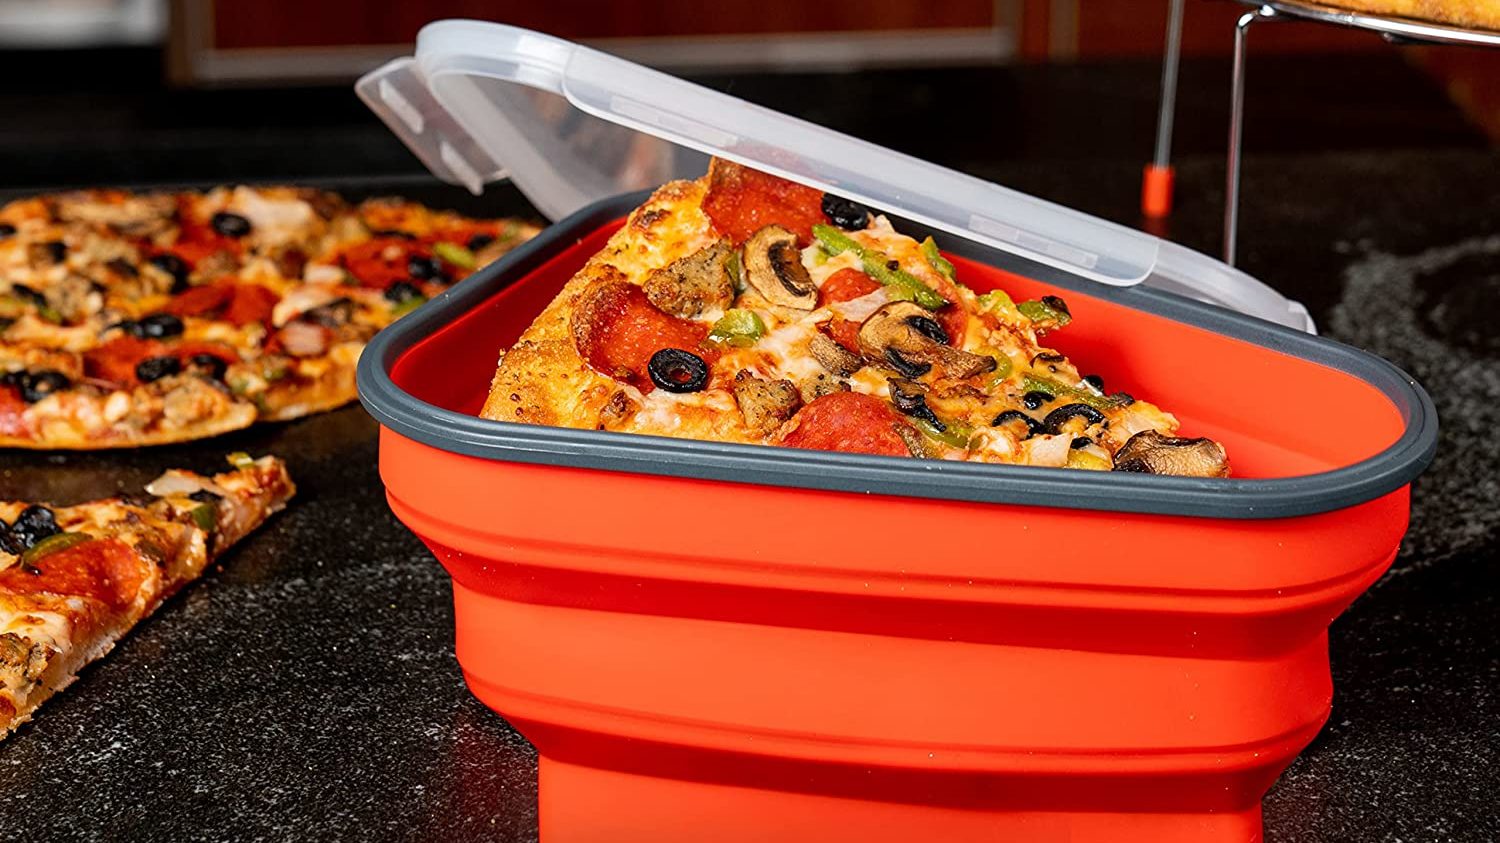 This collapsible pizza pack container is a genius way to store multiple  slices